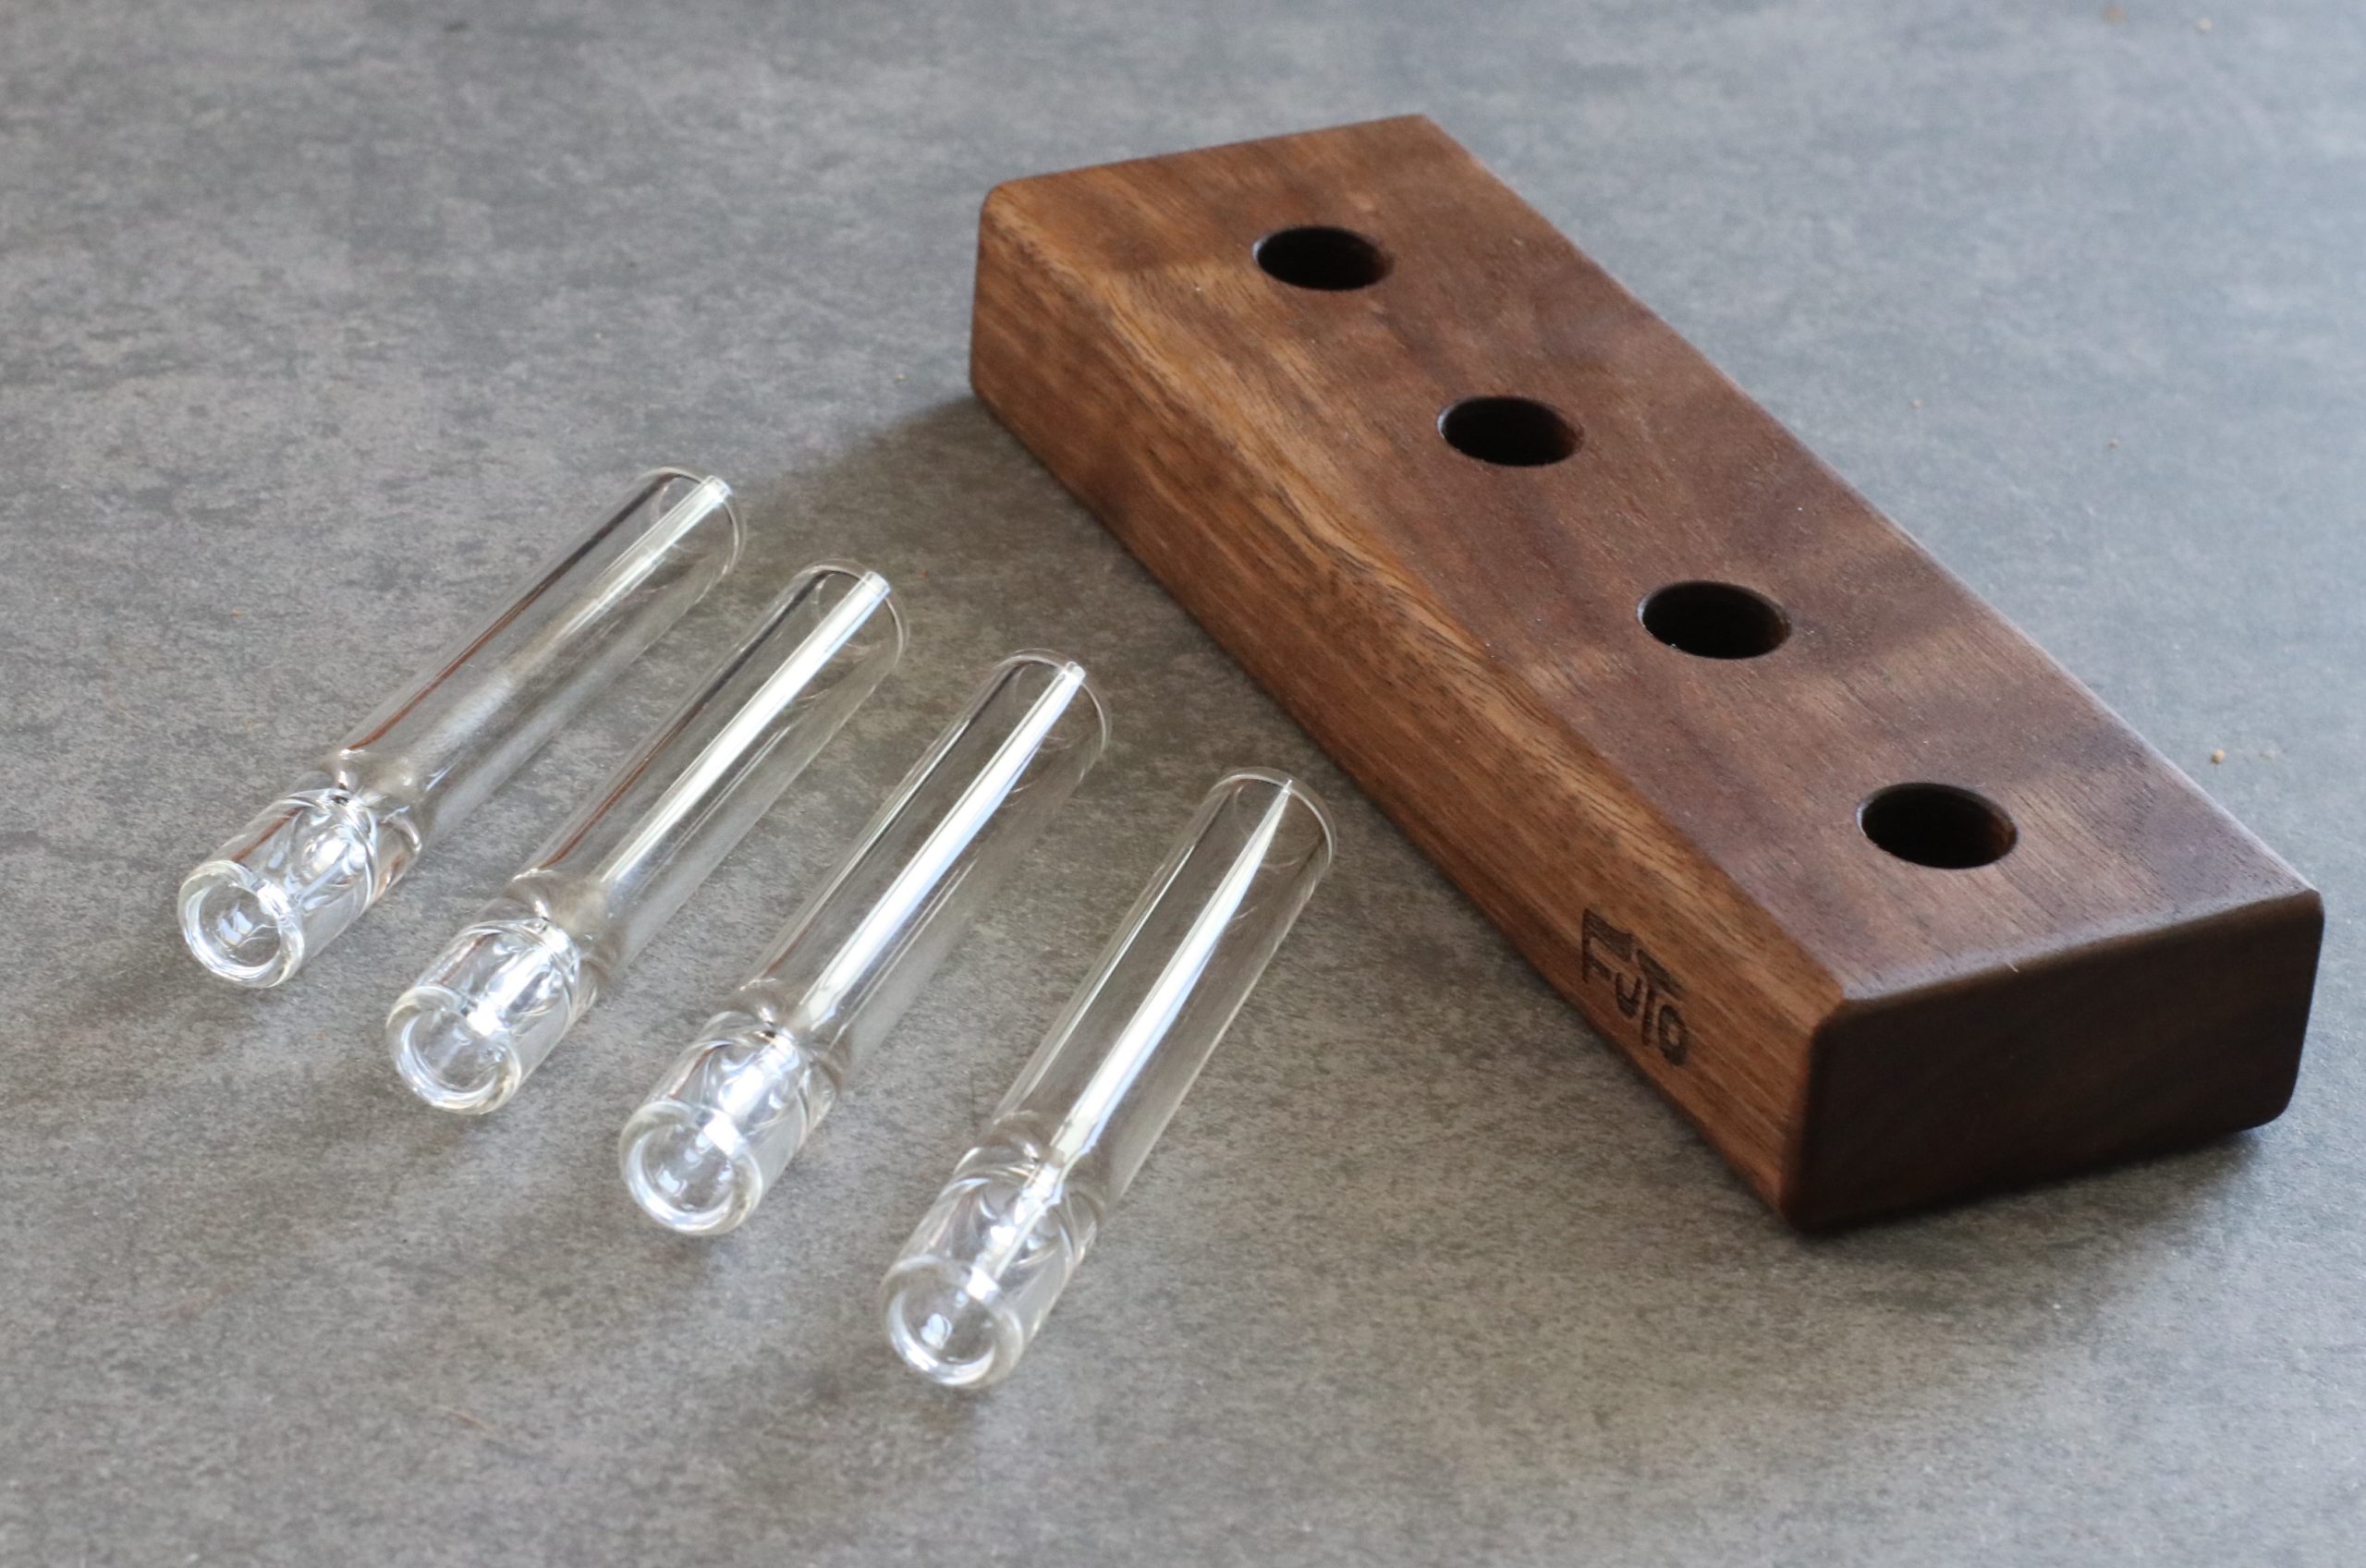 Buy a weed pipe made from wood, stone, metal or glass